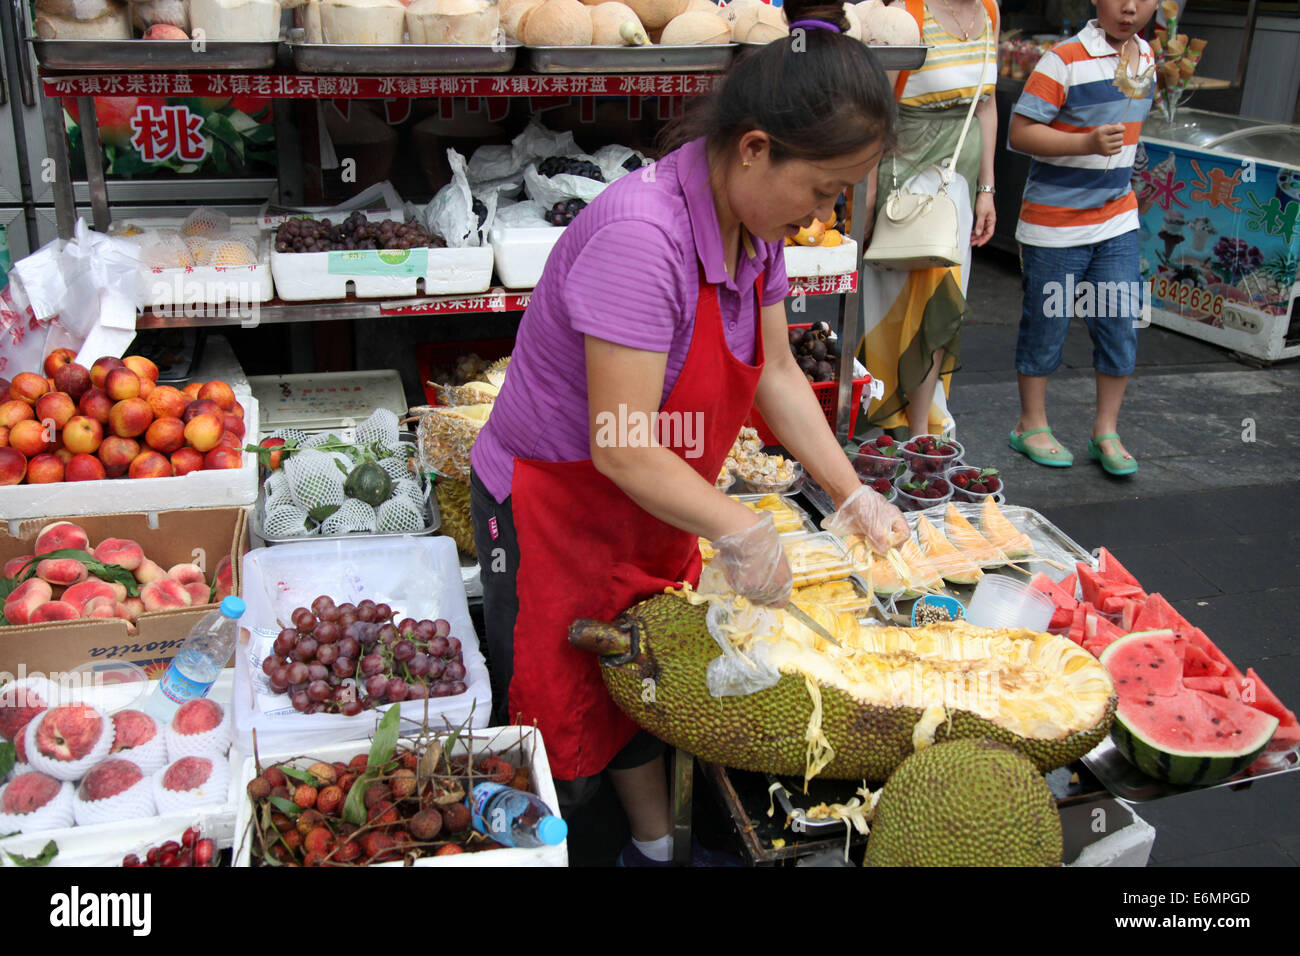 Beijing, China. 04th July, 2014. A woman cuts a durian (cheese fruit) on a market in Beijing, China, 04 July 2014. Photo: Friso Gentsch/dpa/Alamy Live News Stock Photo